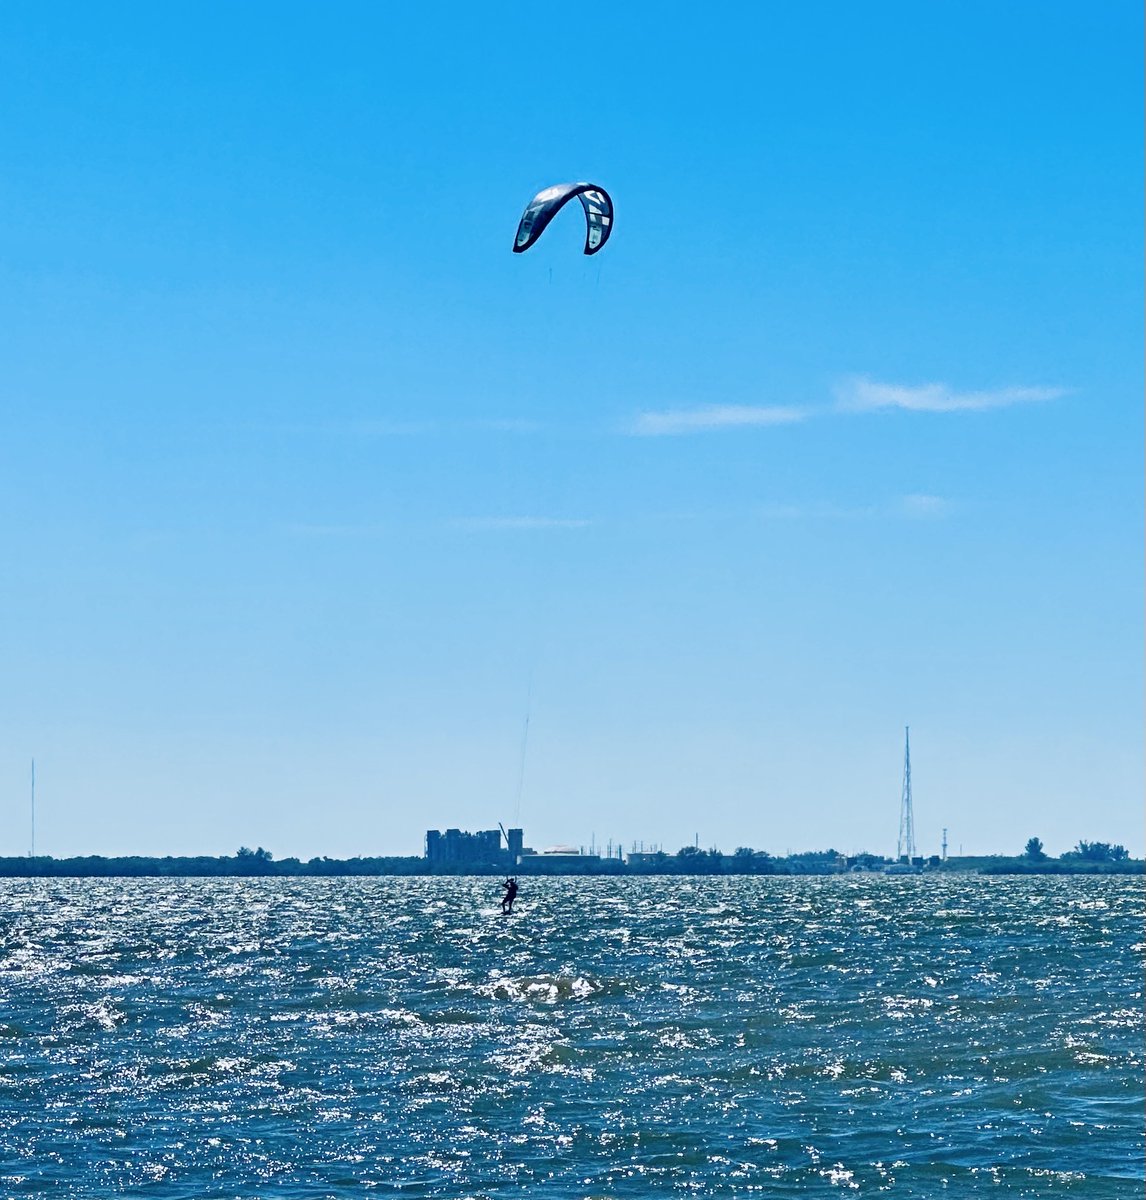 Windy days watching kitesurfers in the bay🪁 #loveyourlife #changeyourlife #luckygirl #abileads #CrazyConfident #baylife #tampa #tampabae #tampabay #tampaphotography #beinspired #beauty #LifeAfterLeapingIn #relocation #goodvibes #gratitude #gulfviews #happiness  #picnicisland